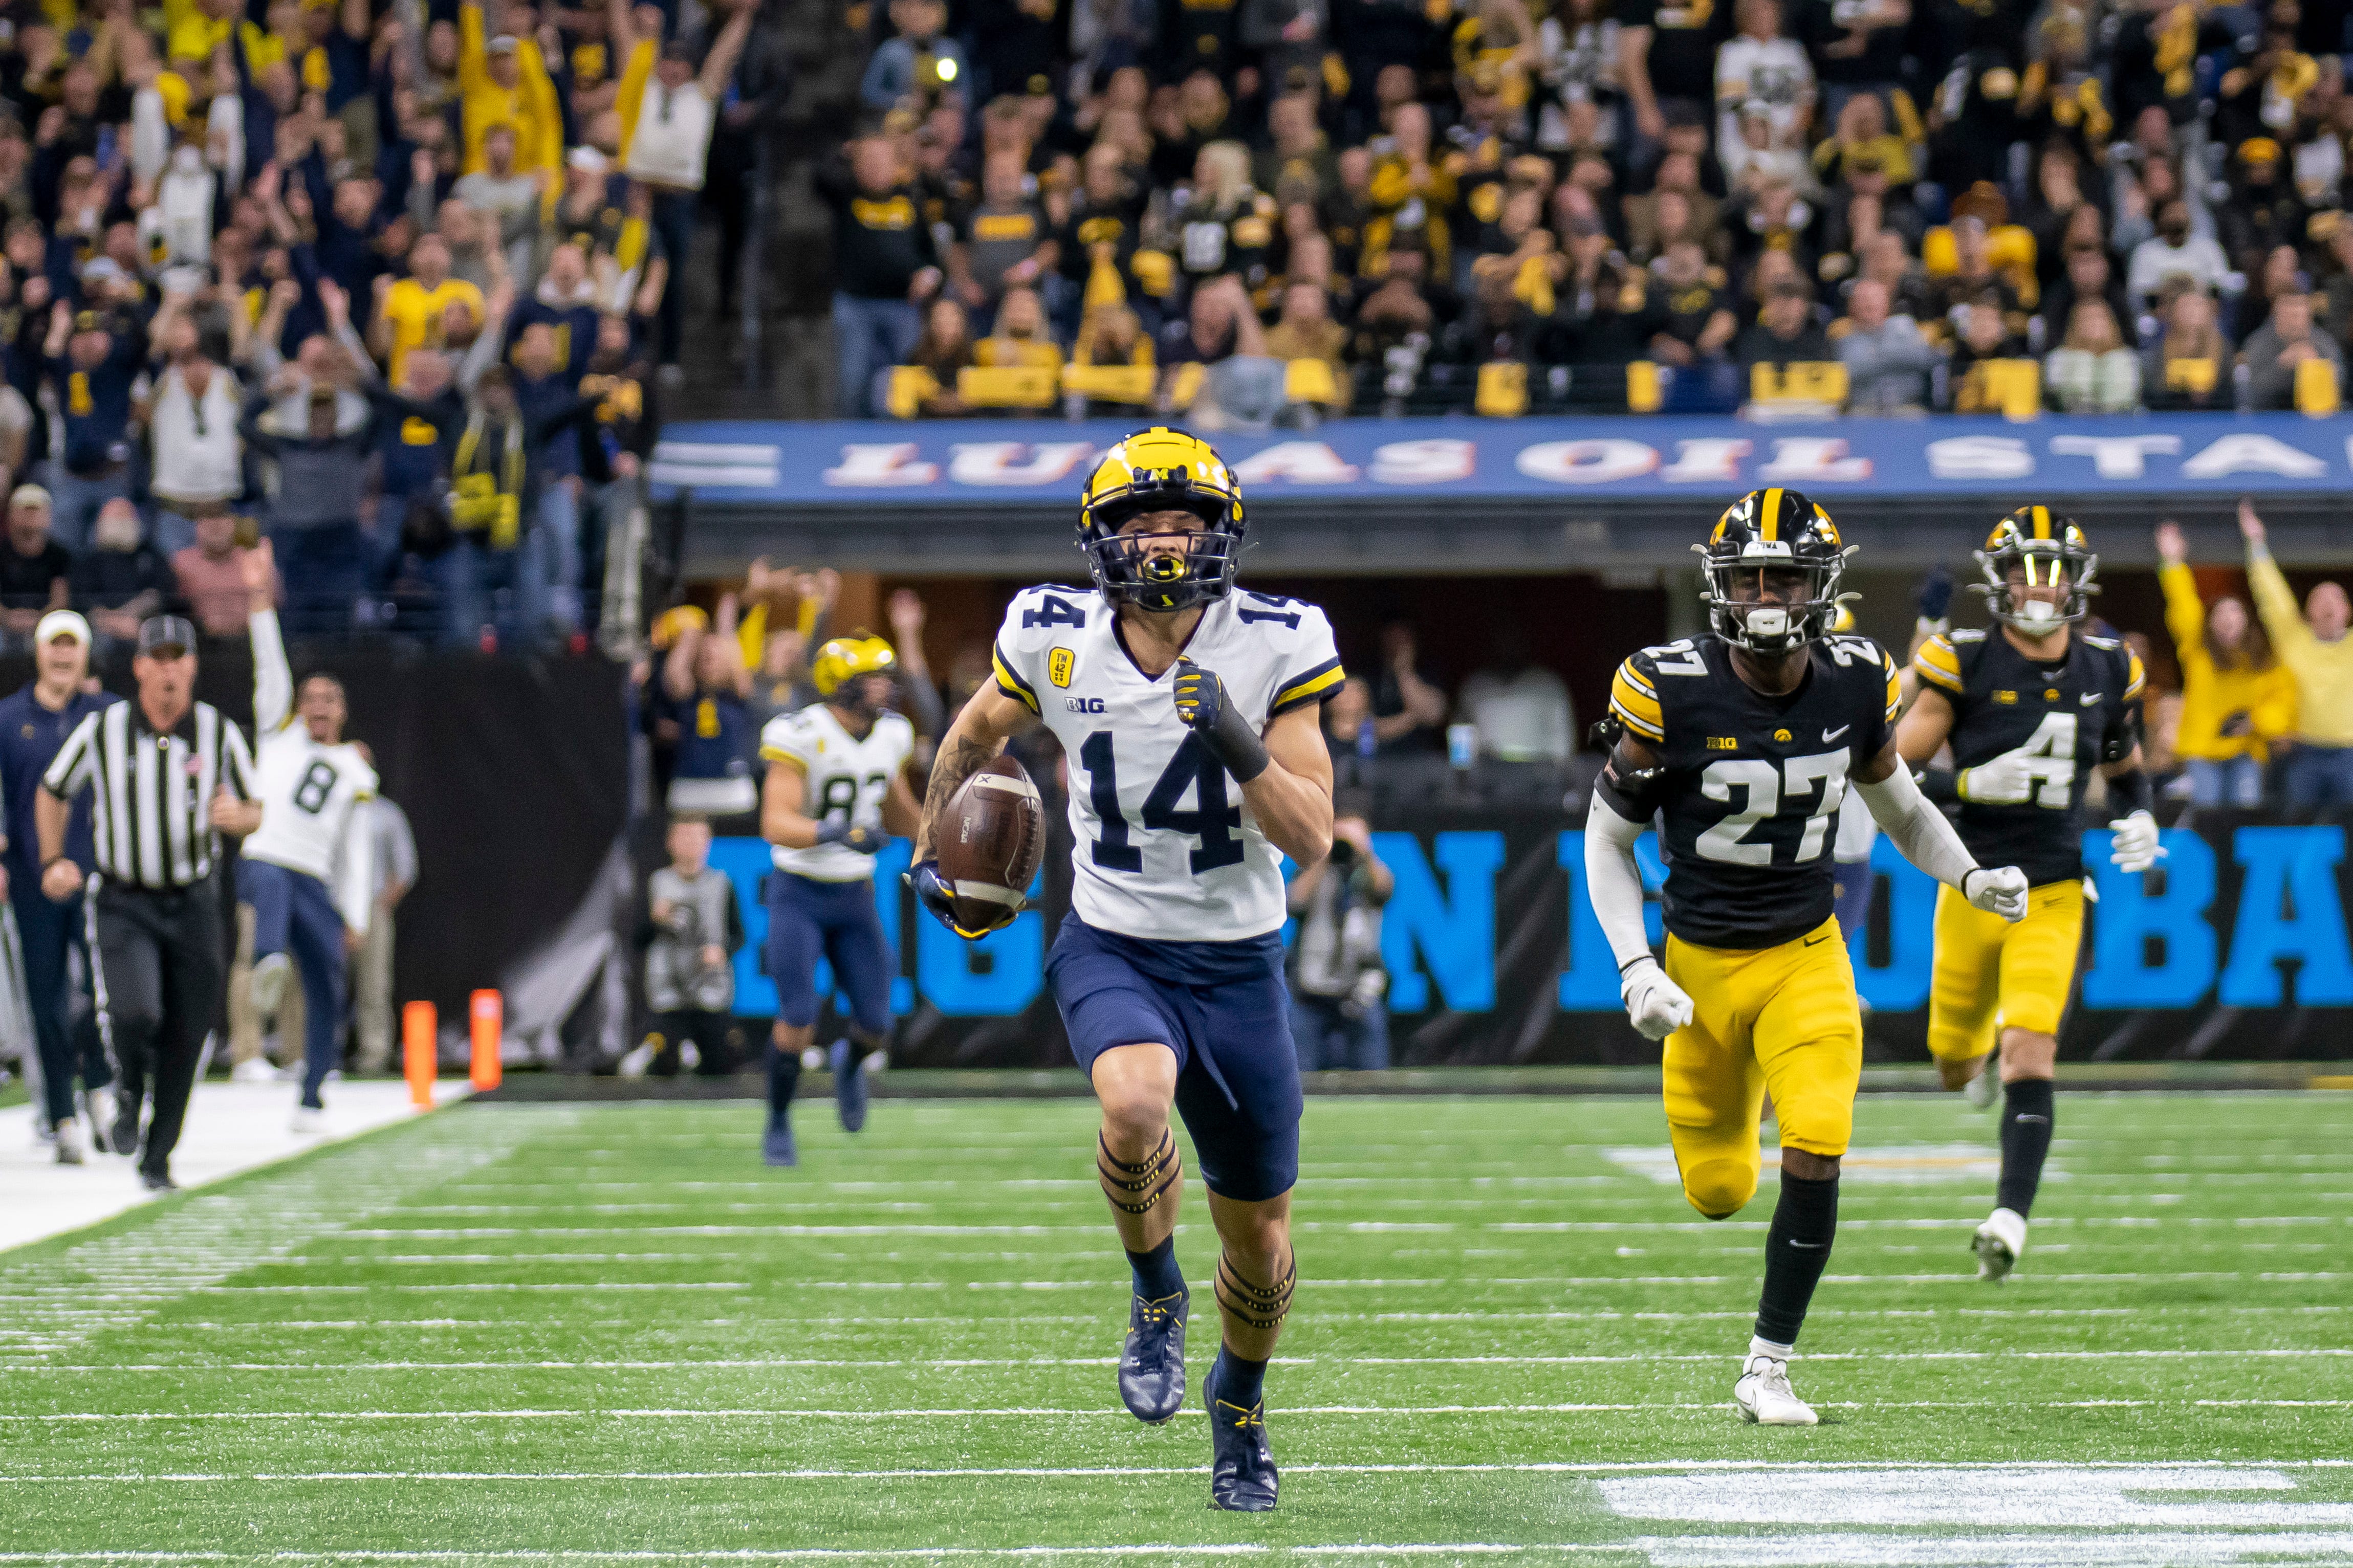 Michigan wide receiver Roman Wilson runs for a touchdown during the first quarter of the Big Ten Championship Game against Iowa.